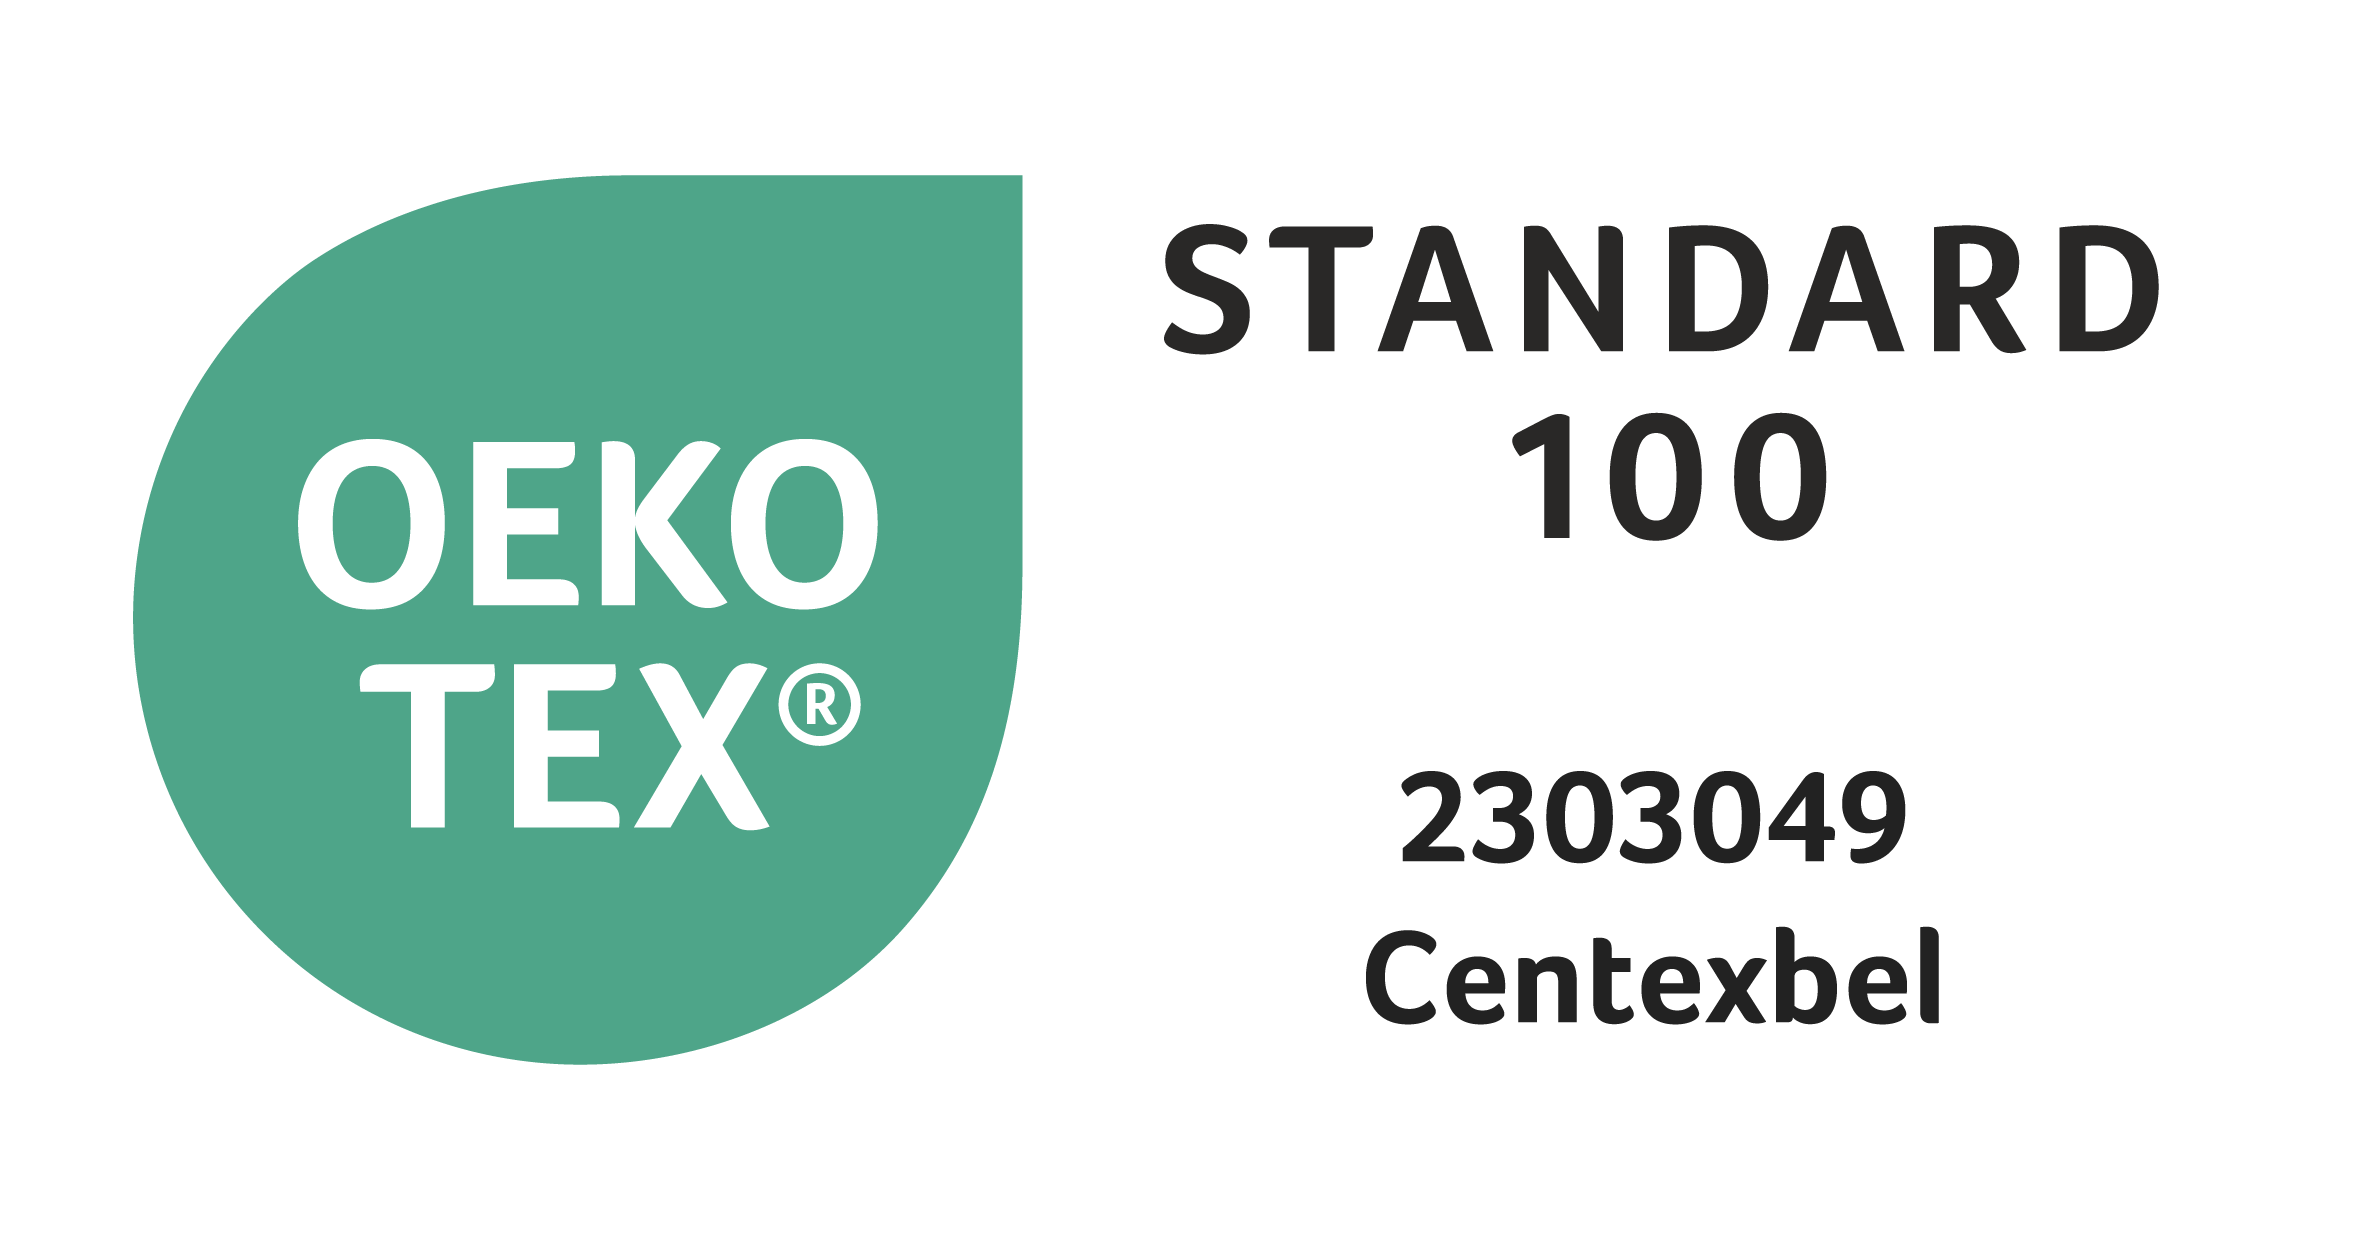 Tested for harmful substances according to Oeko-Tex® Standard 100 (2303049/Centexbel)